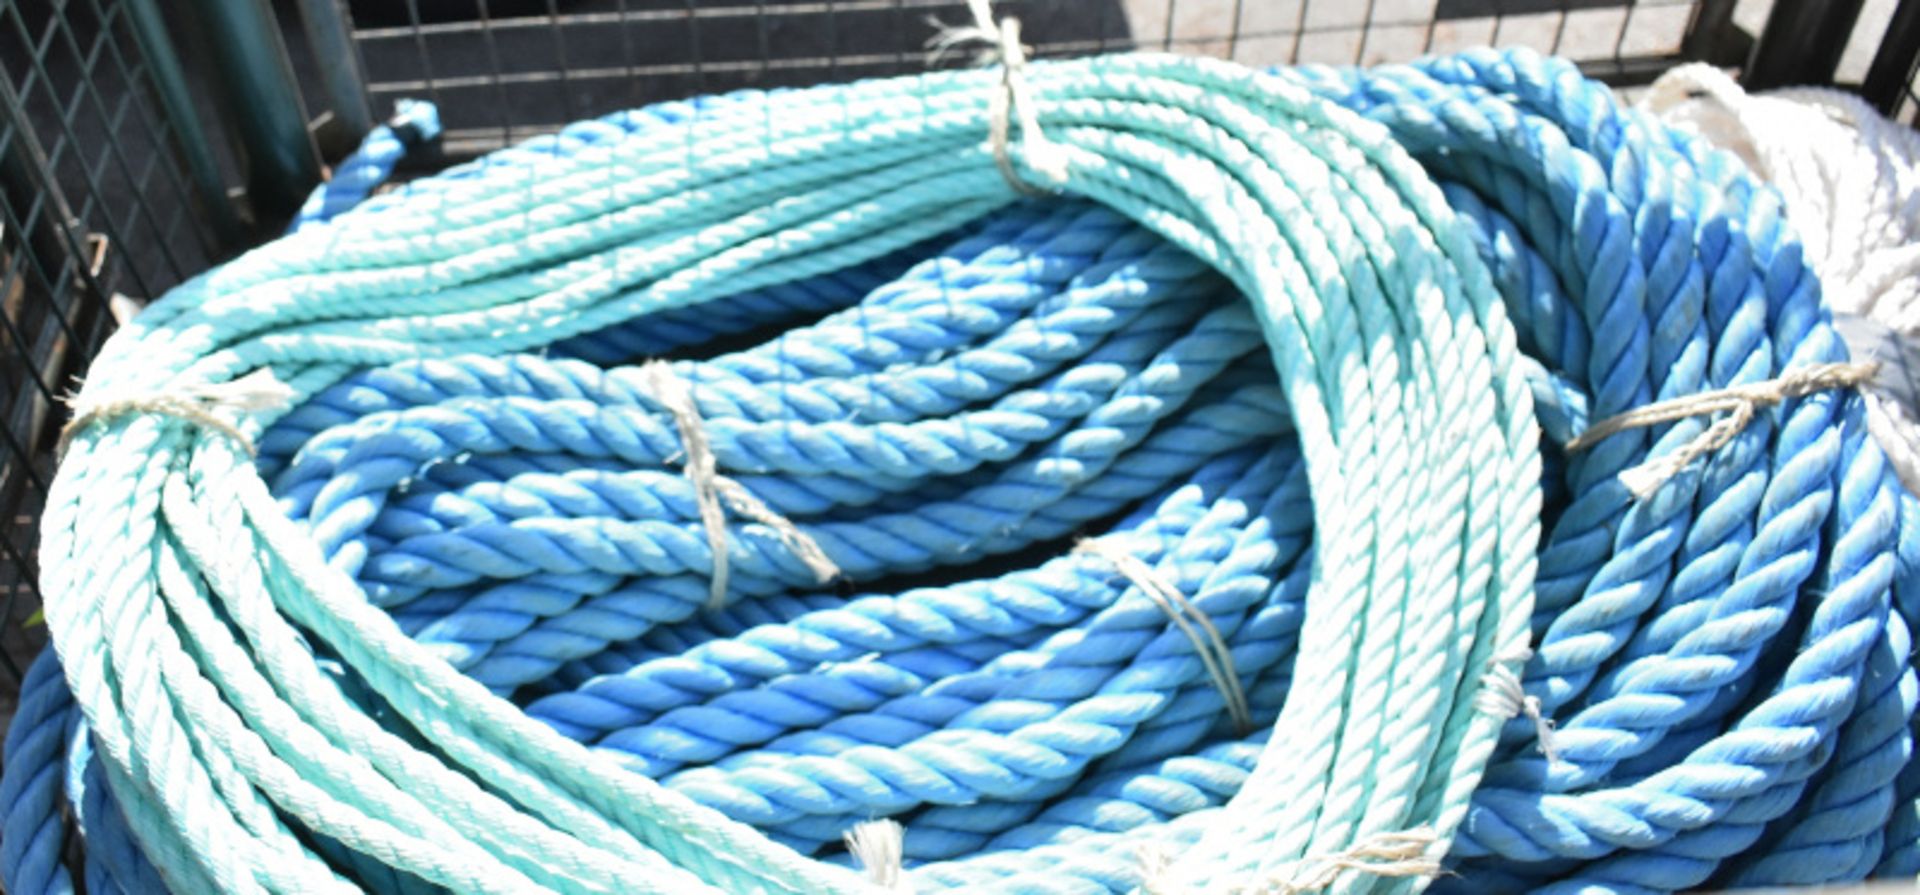 4x 40M Rope lengths - Image 2 of 2